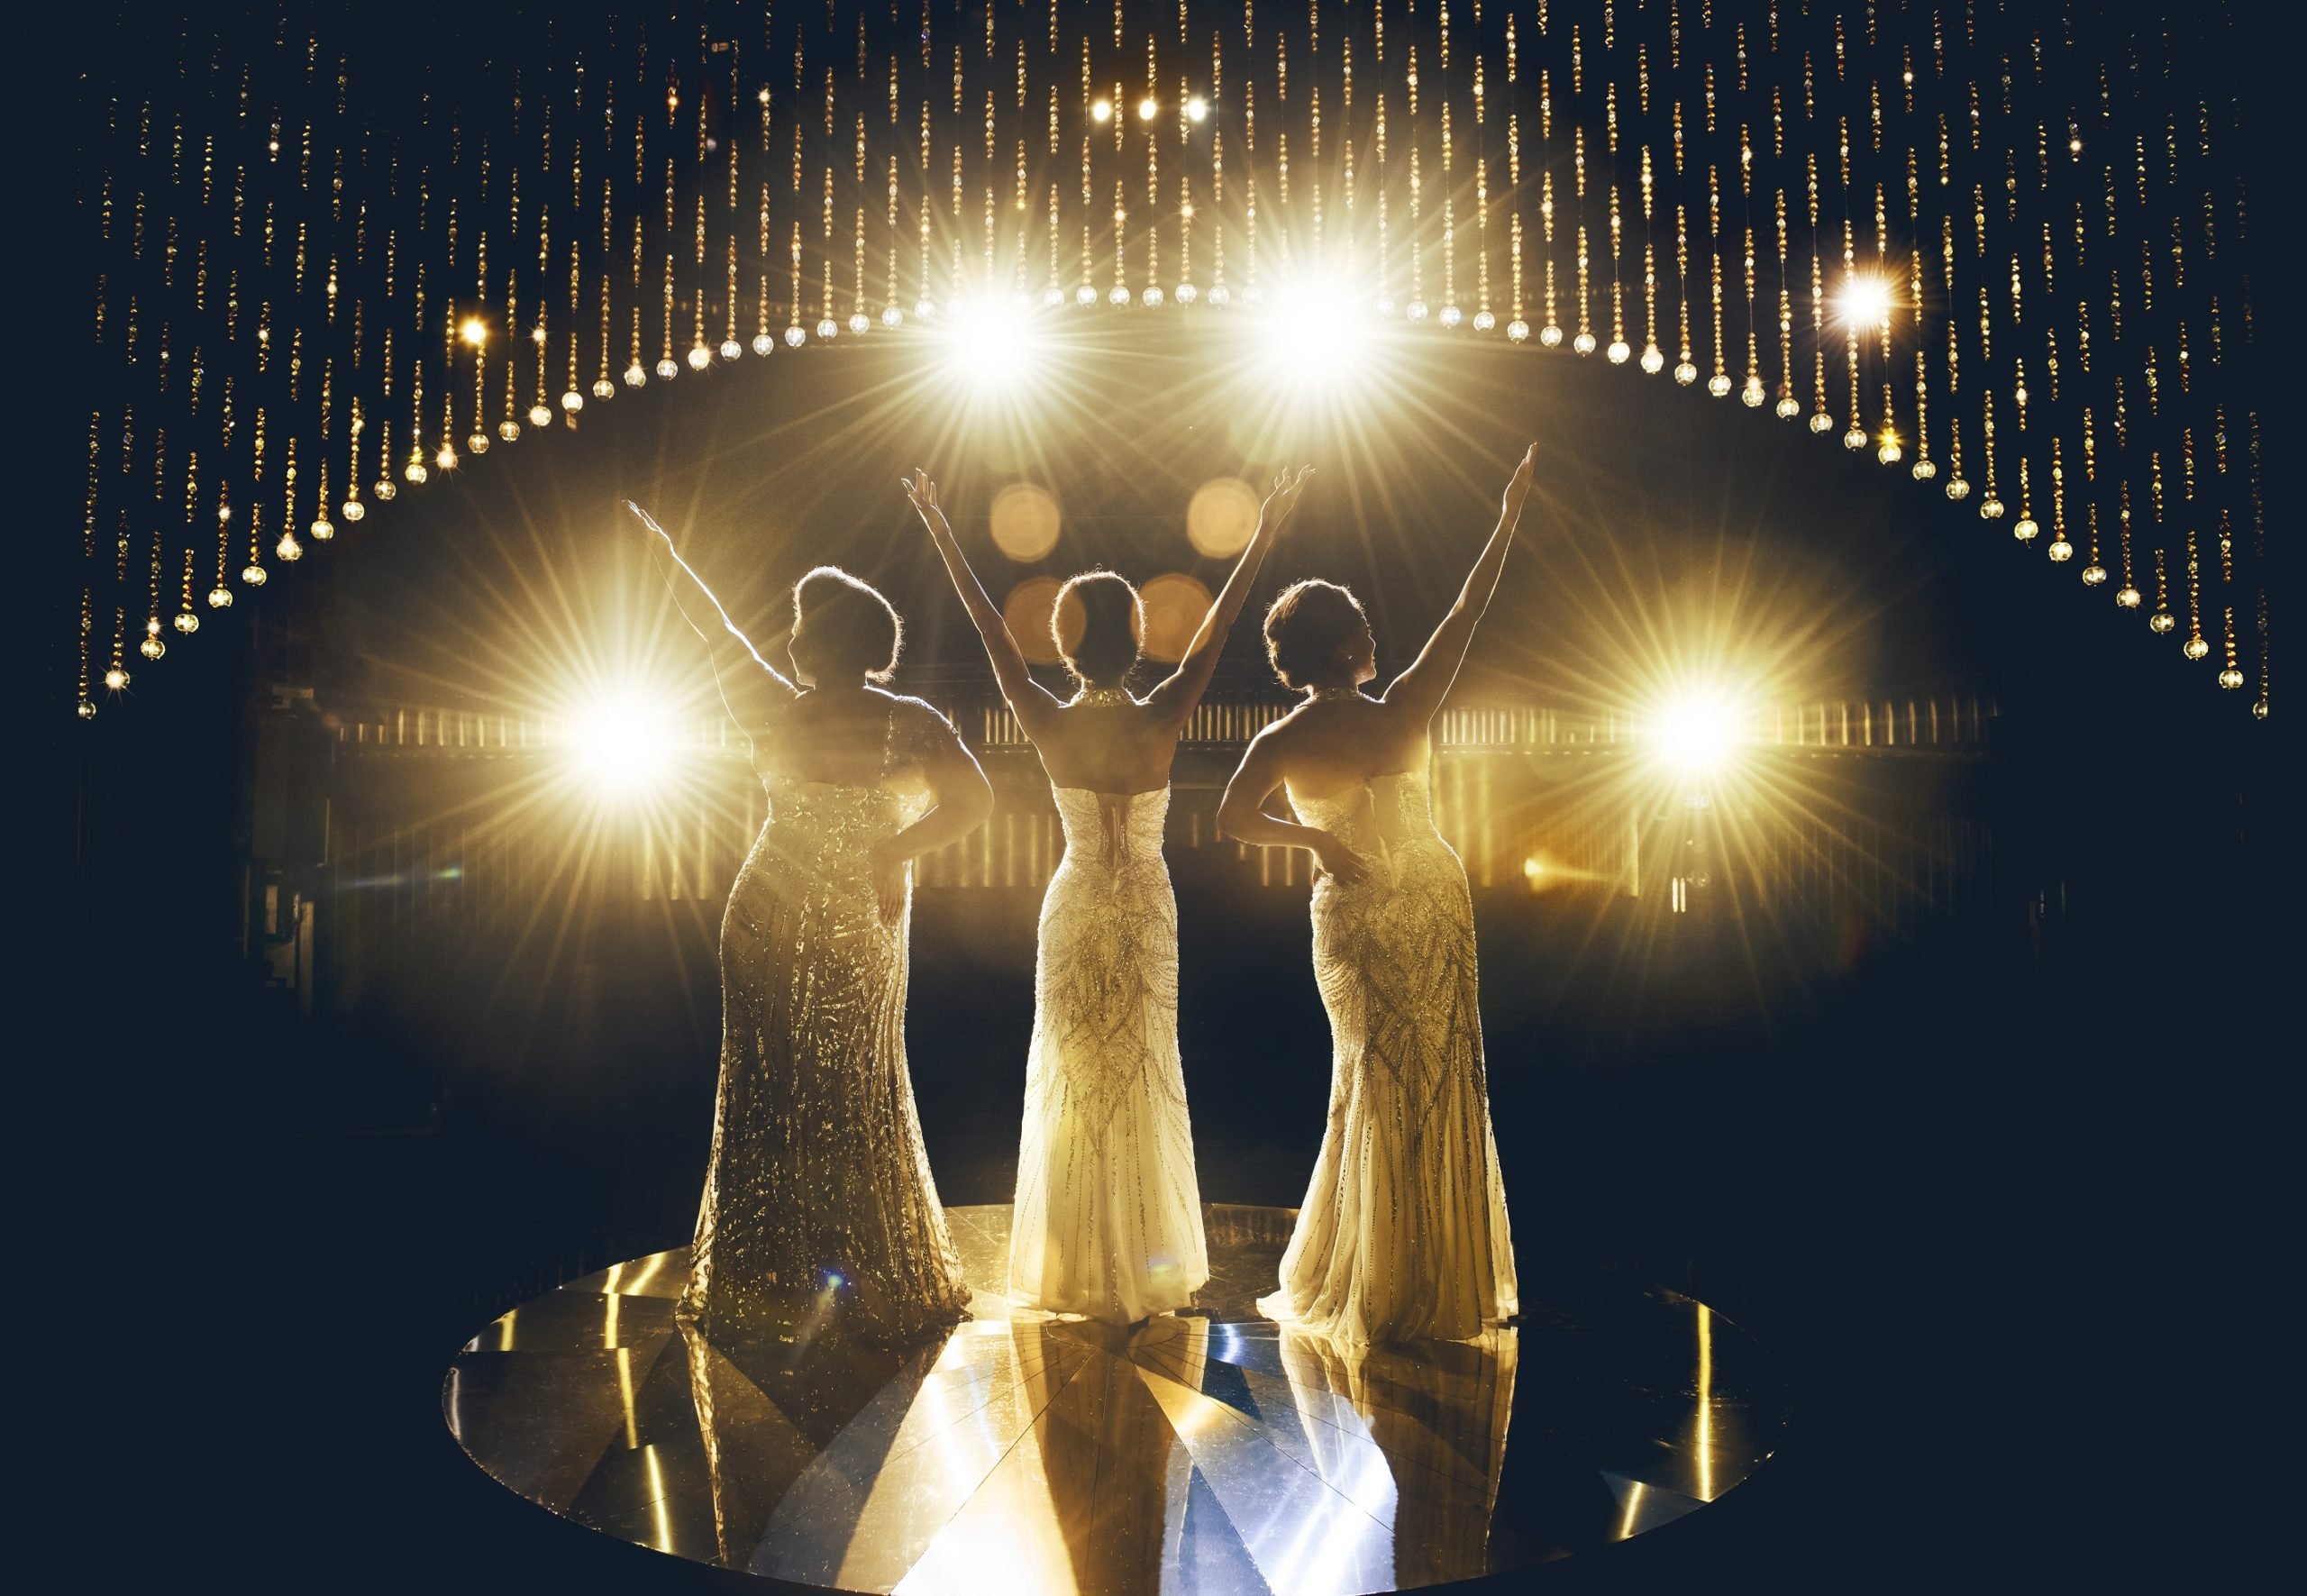 Dreamgirls is coming to Milton Keynes Theatre